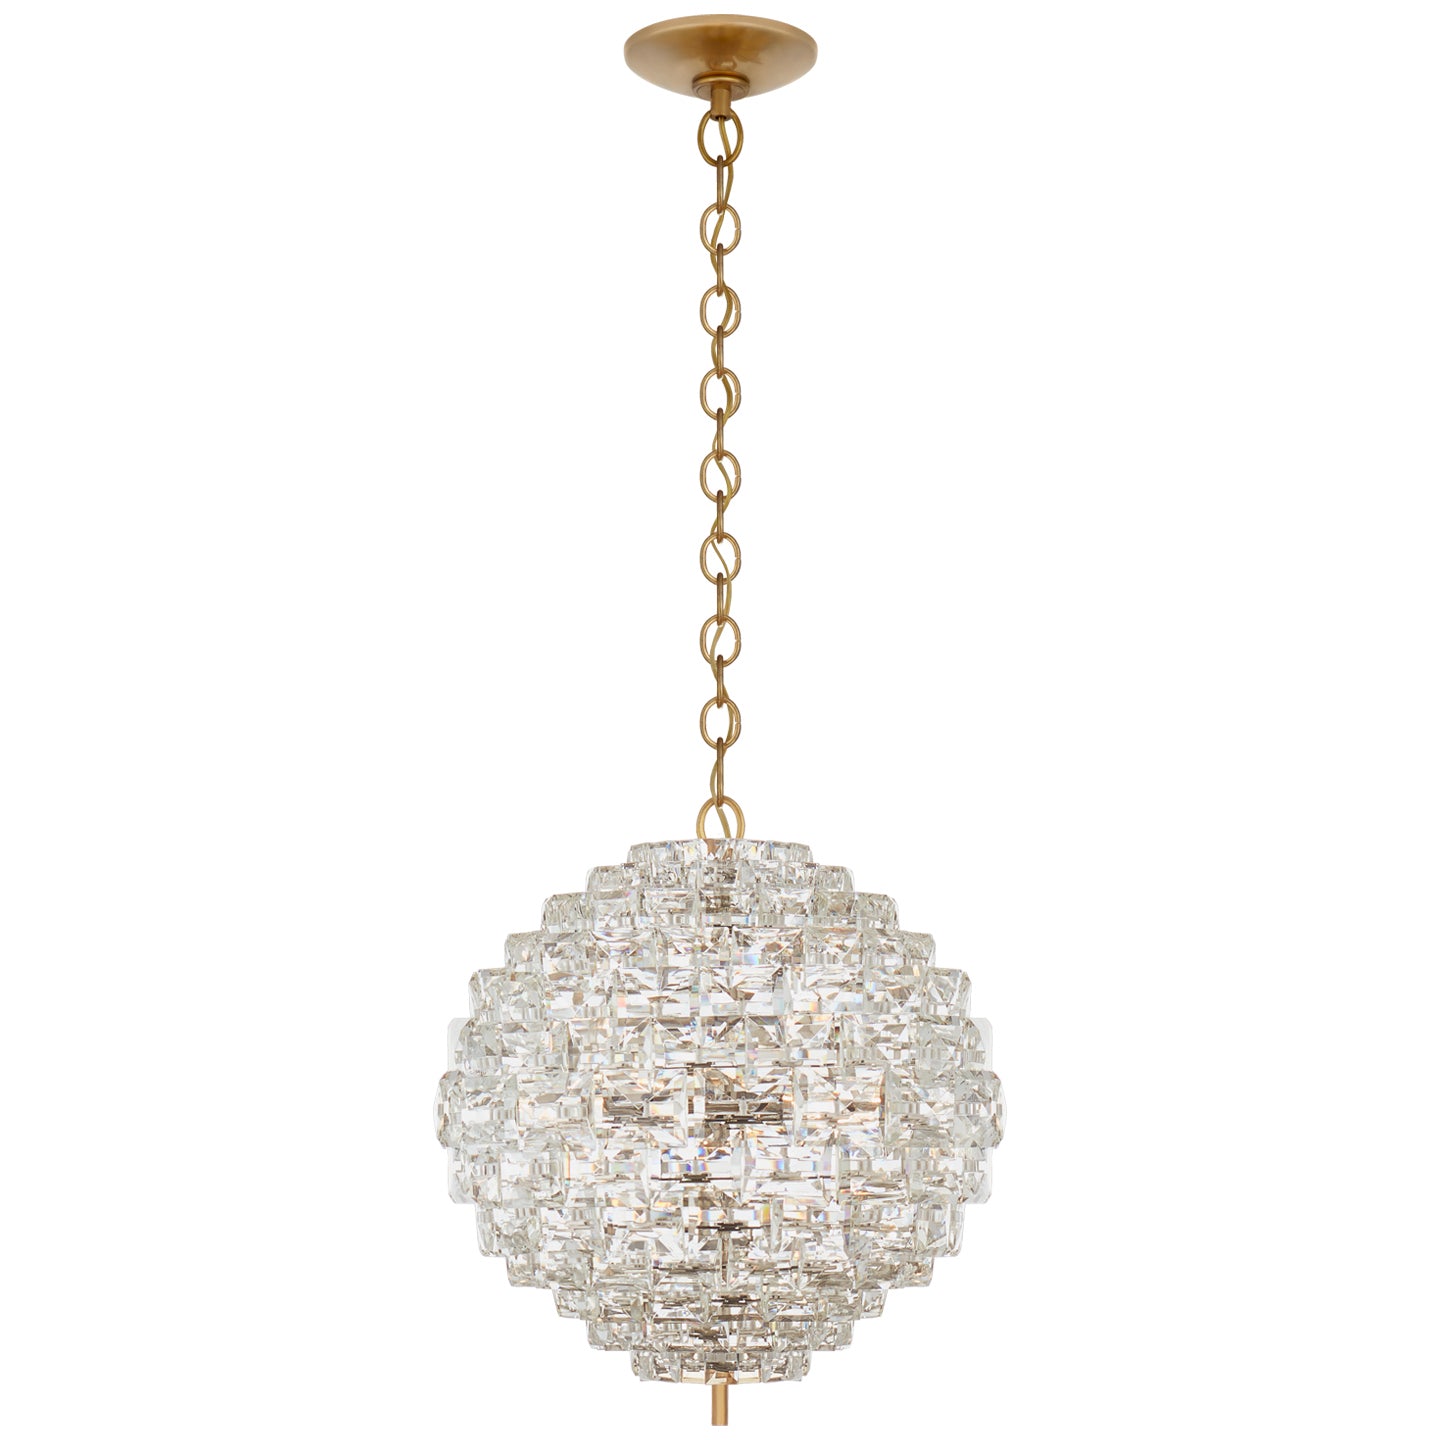 Visual Comfort Signature - CHC 5915AB/CG - Six Light Chandelier - Karina - Antique-Burnished Brass and Crystal